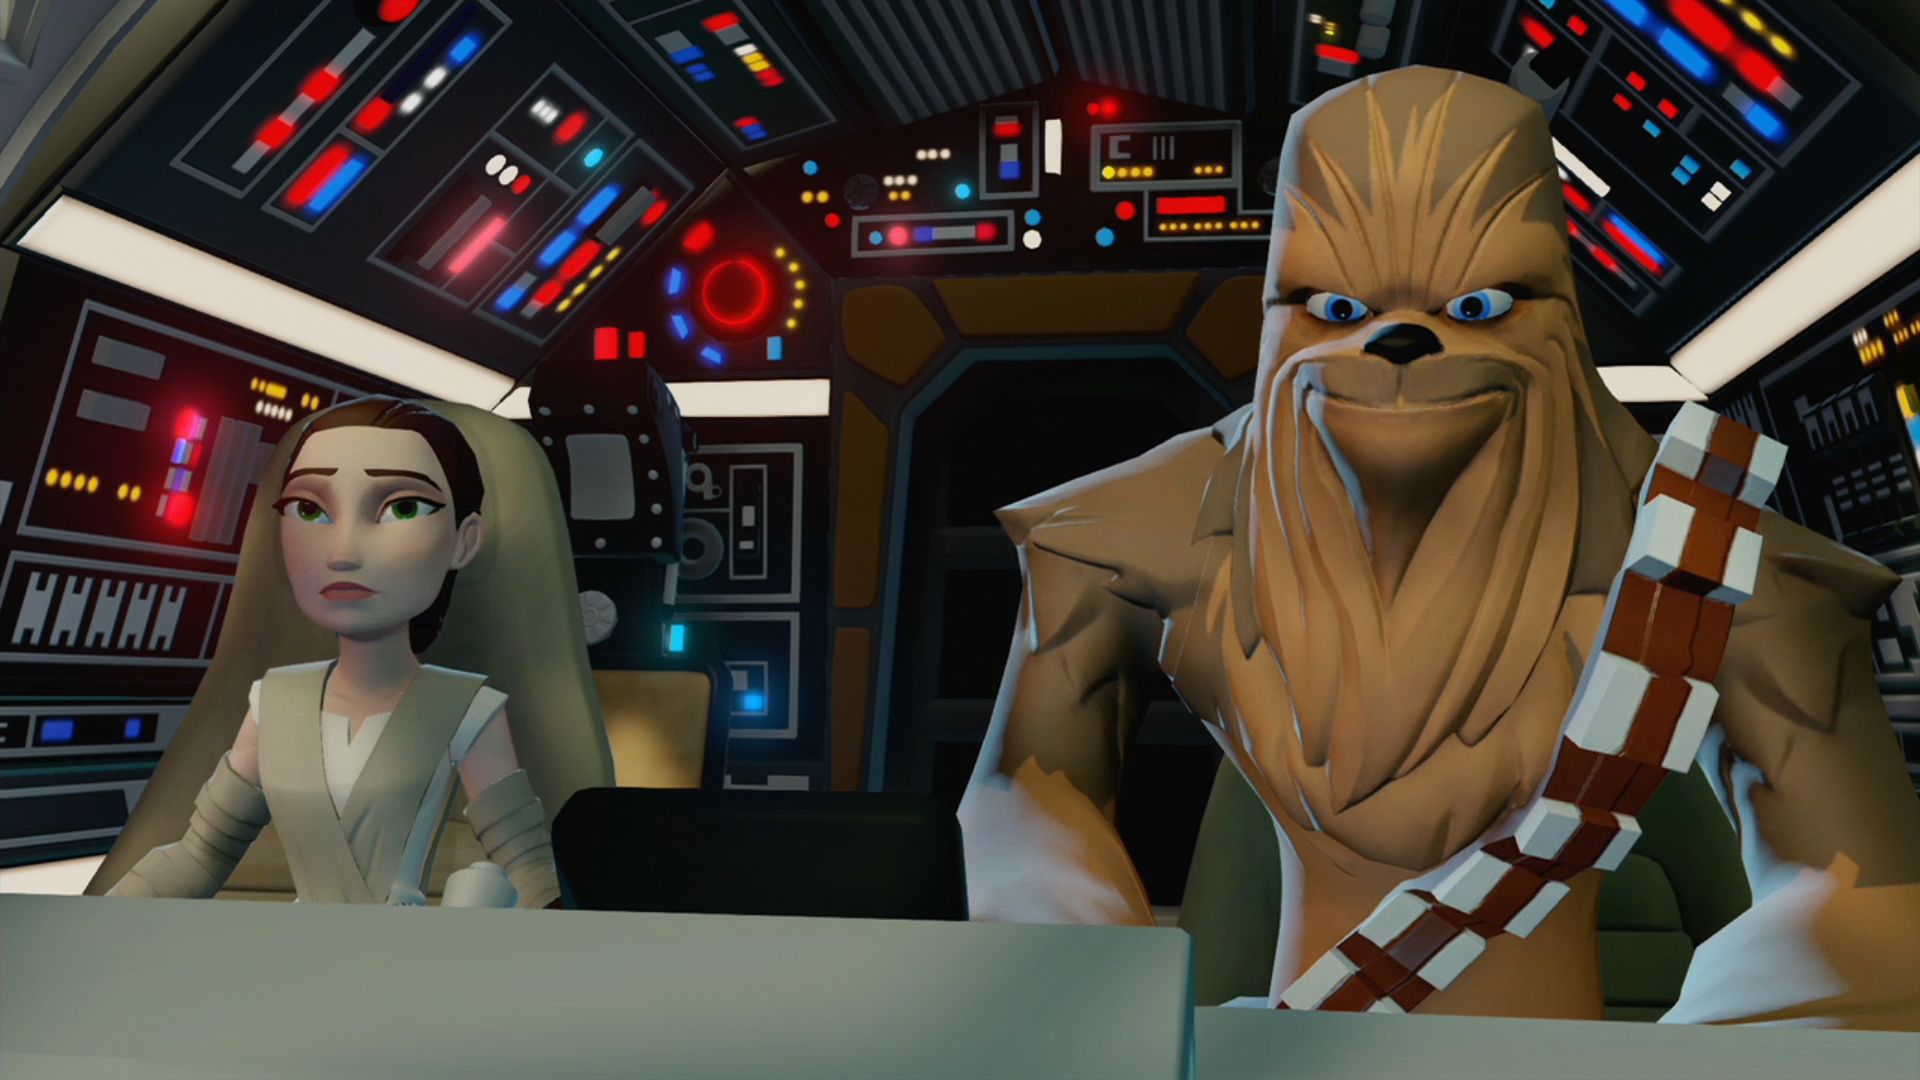 A Funny Thing Happens At The End Of Disney Infinity’s Star Wars: The Force Awakens Play Set